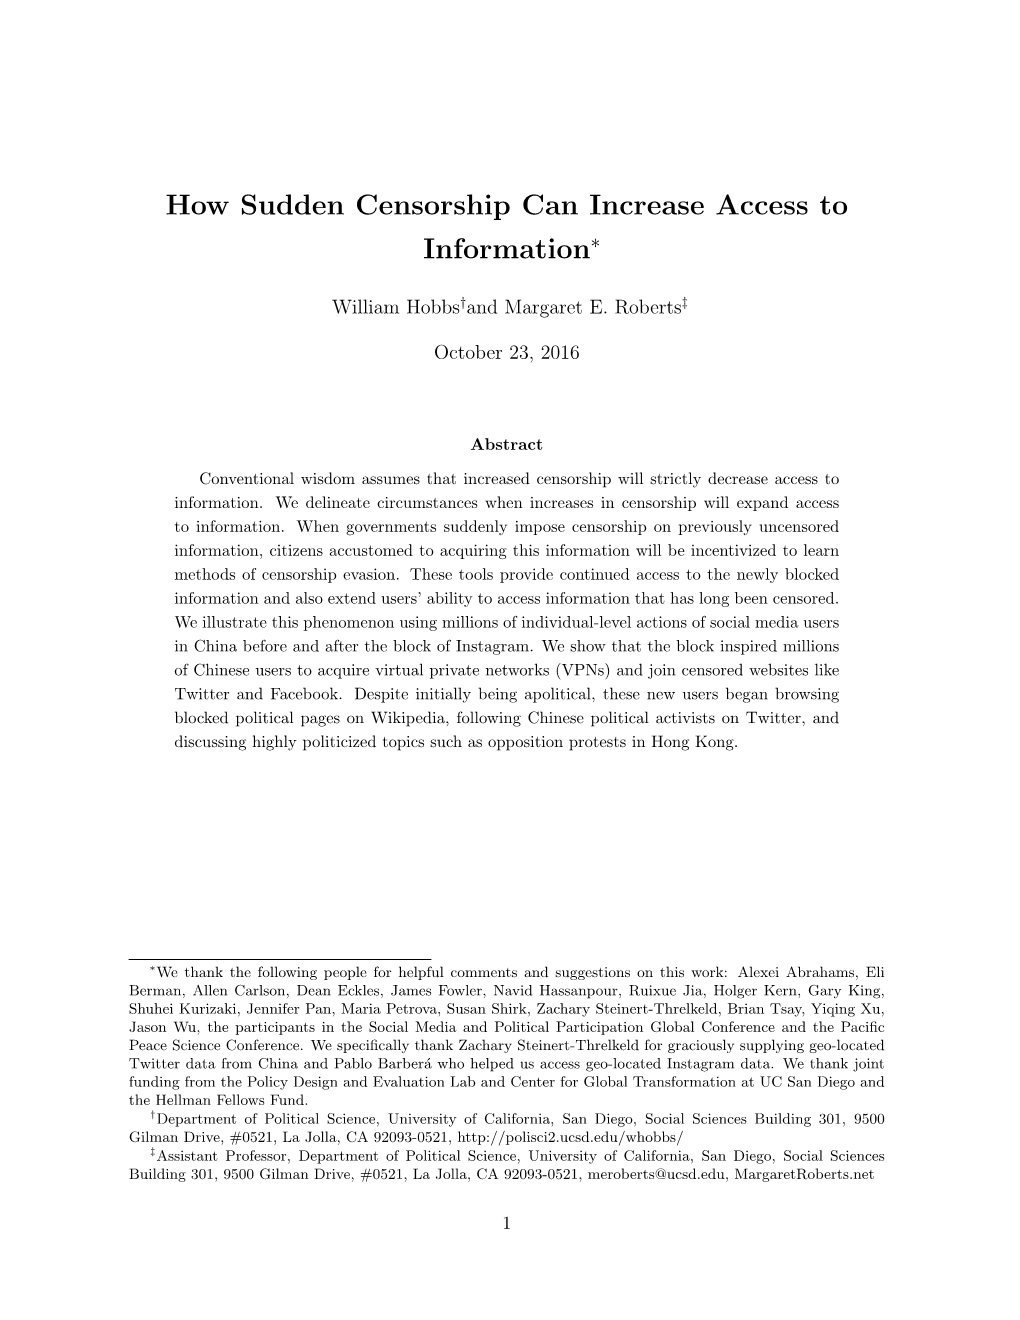 How Sudden Censorship Can Increase Access to Information∗